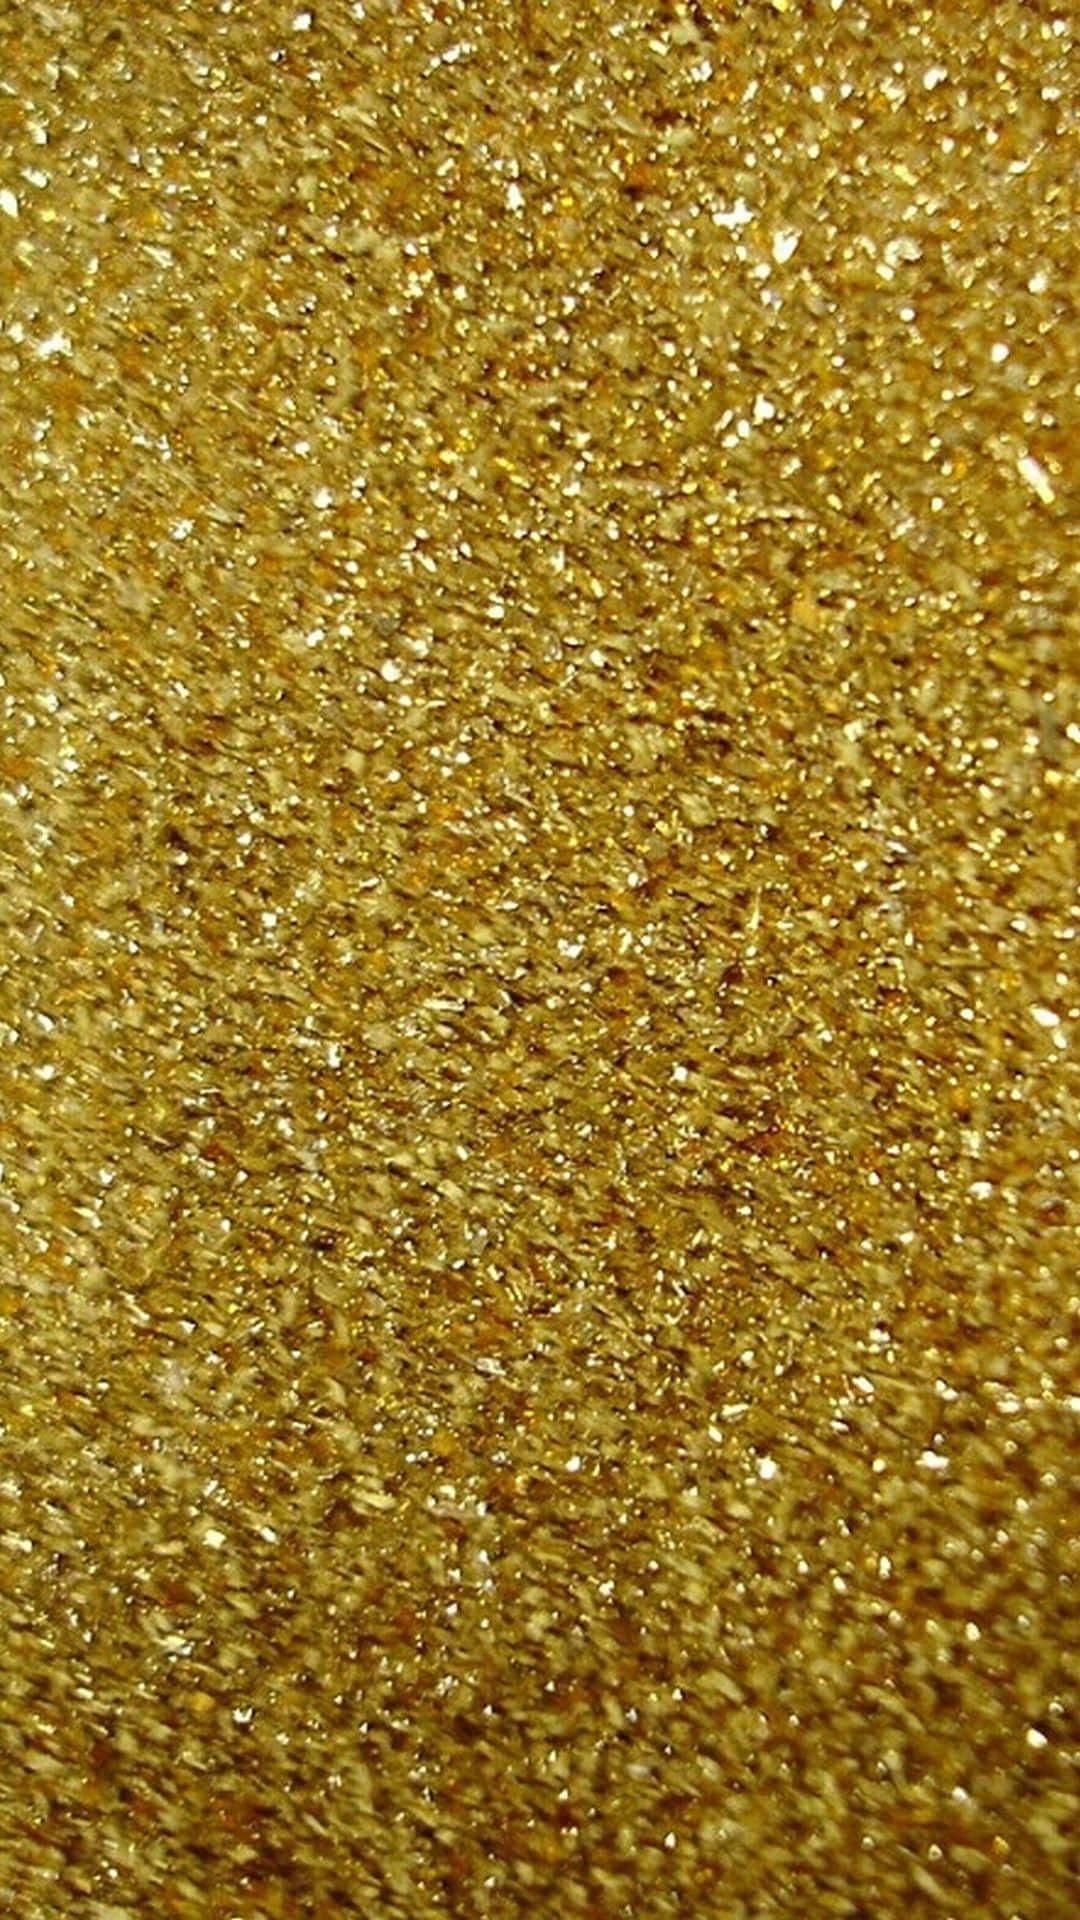 Have a sparkly day with this fun yellow glitter background.